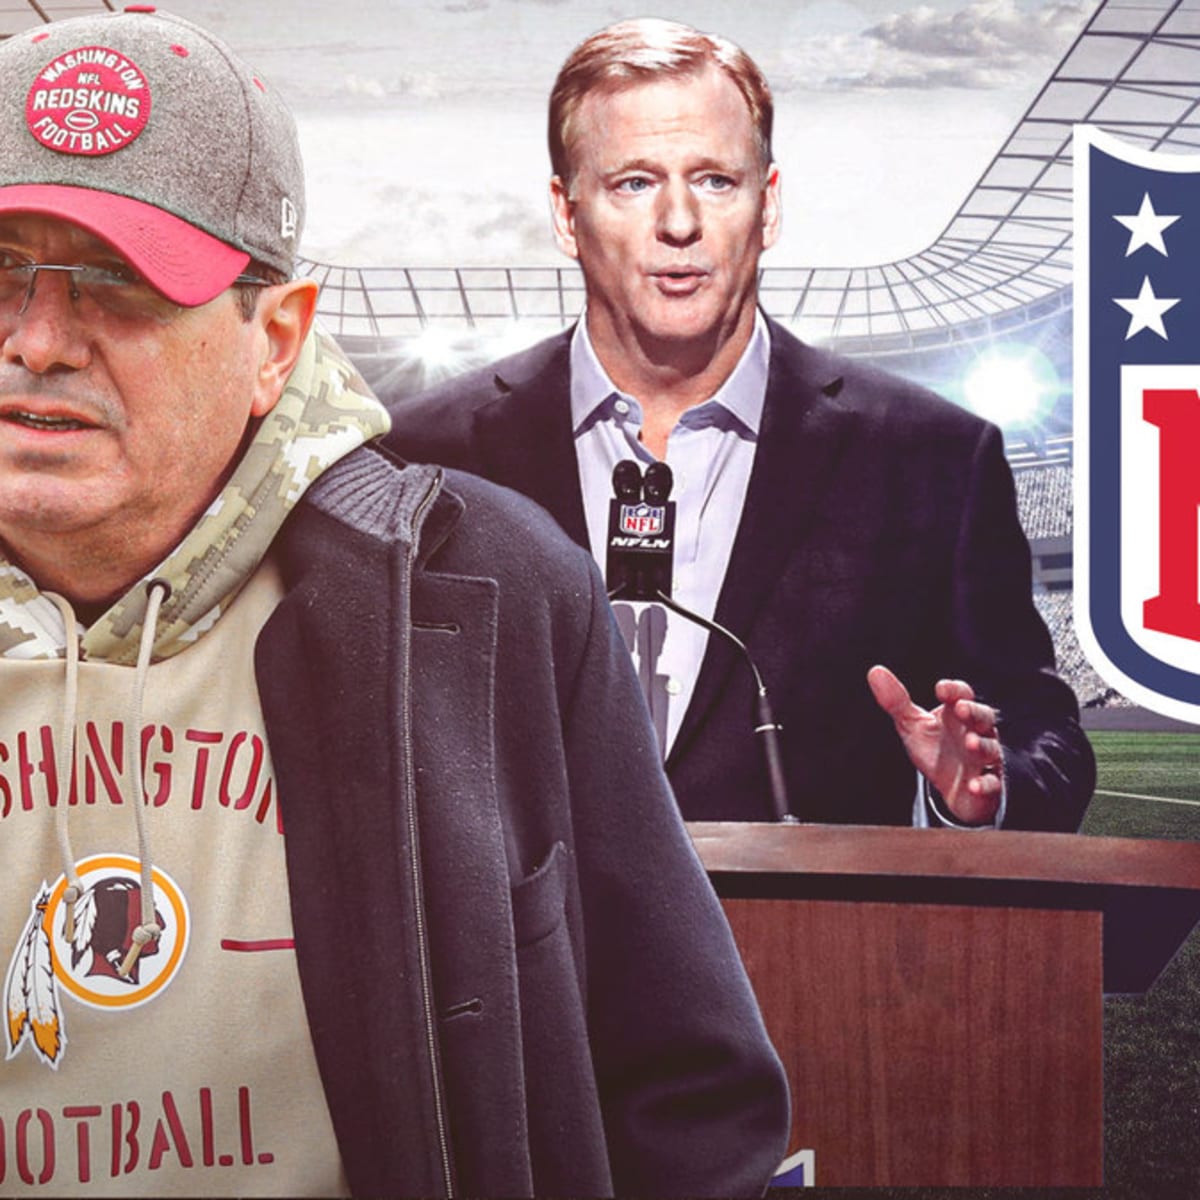 No More Dodging': Government Seeks Testimony from Washington Commanders  Owner Daniel Snyder, NFL Commissioner Roger Goodell - Sports Illustrated  Washington Football News, Analysis and More